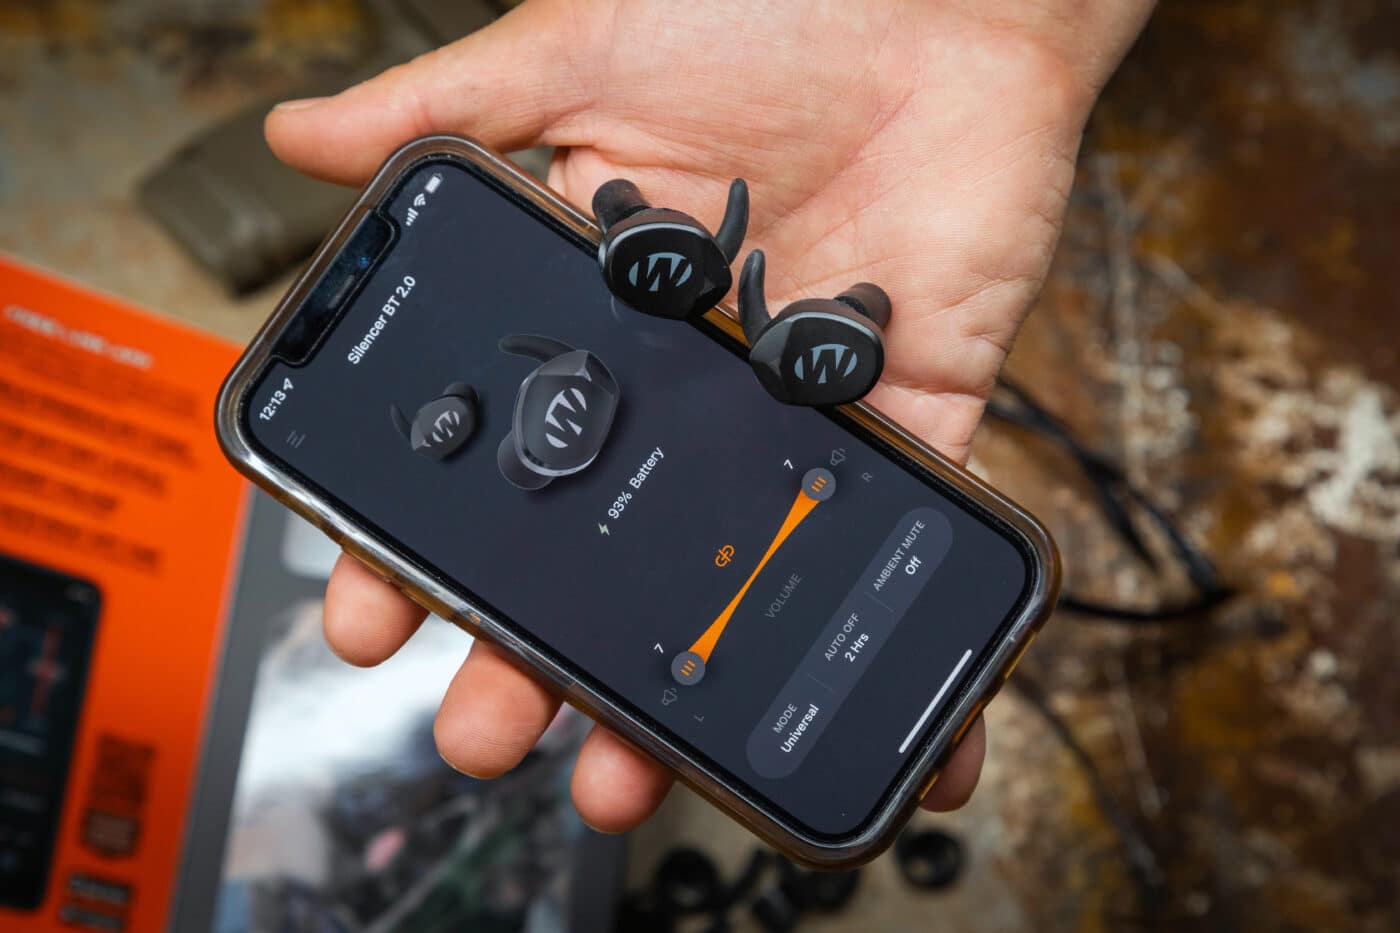 iPhone Control of the Walkers Silencer Earbuds